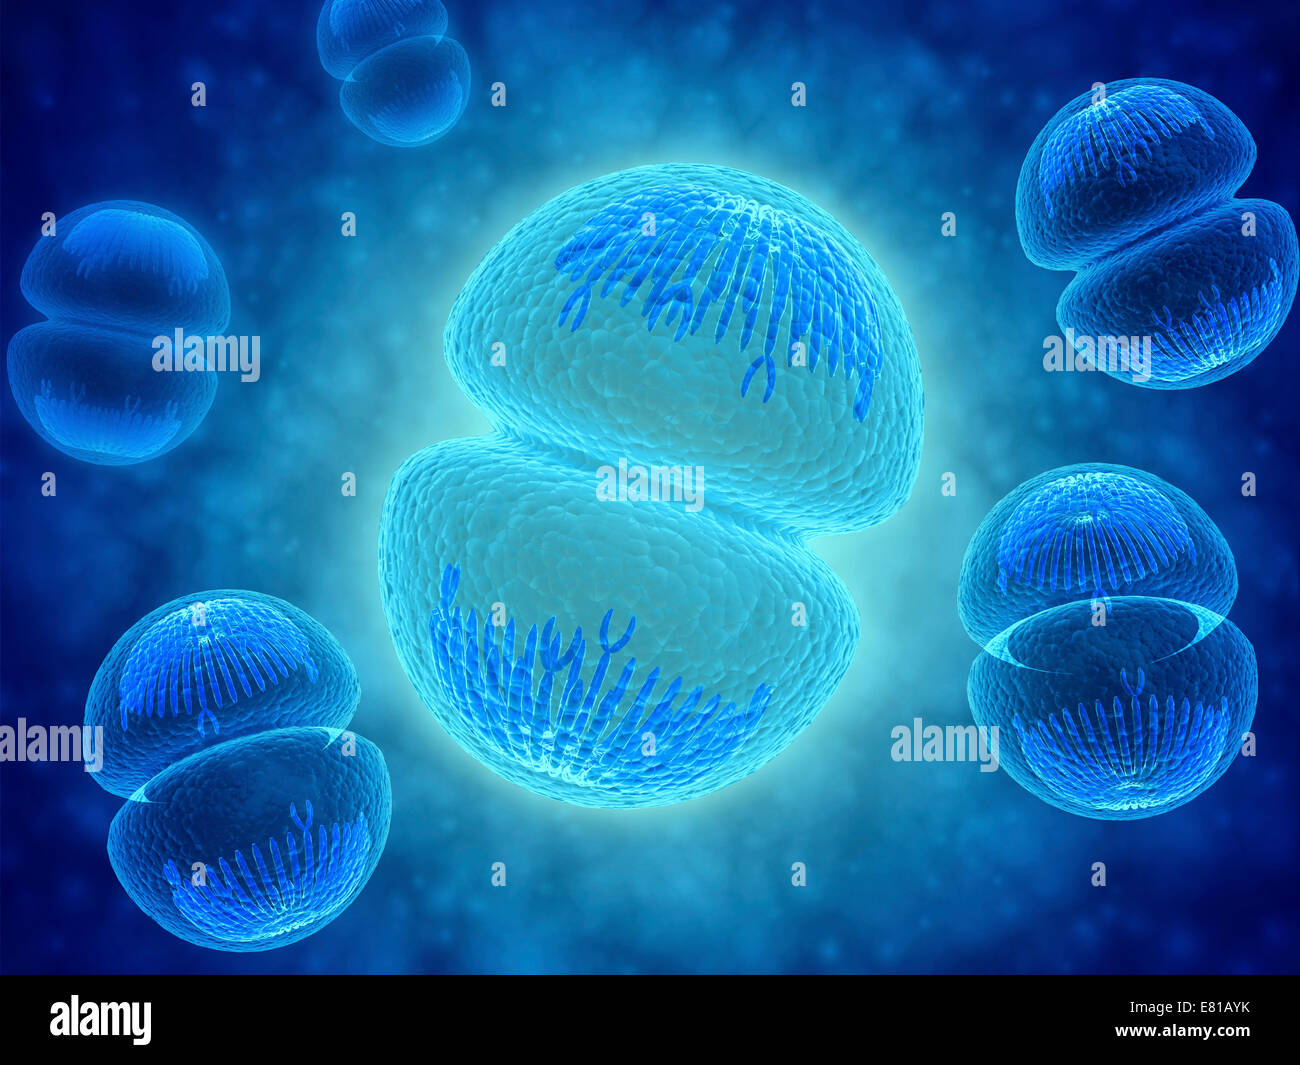 Conceptual image of mitosis. Mitosis is the process in the cell cycle by which a cell duplicates into two genetically identical Stock Photo